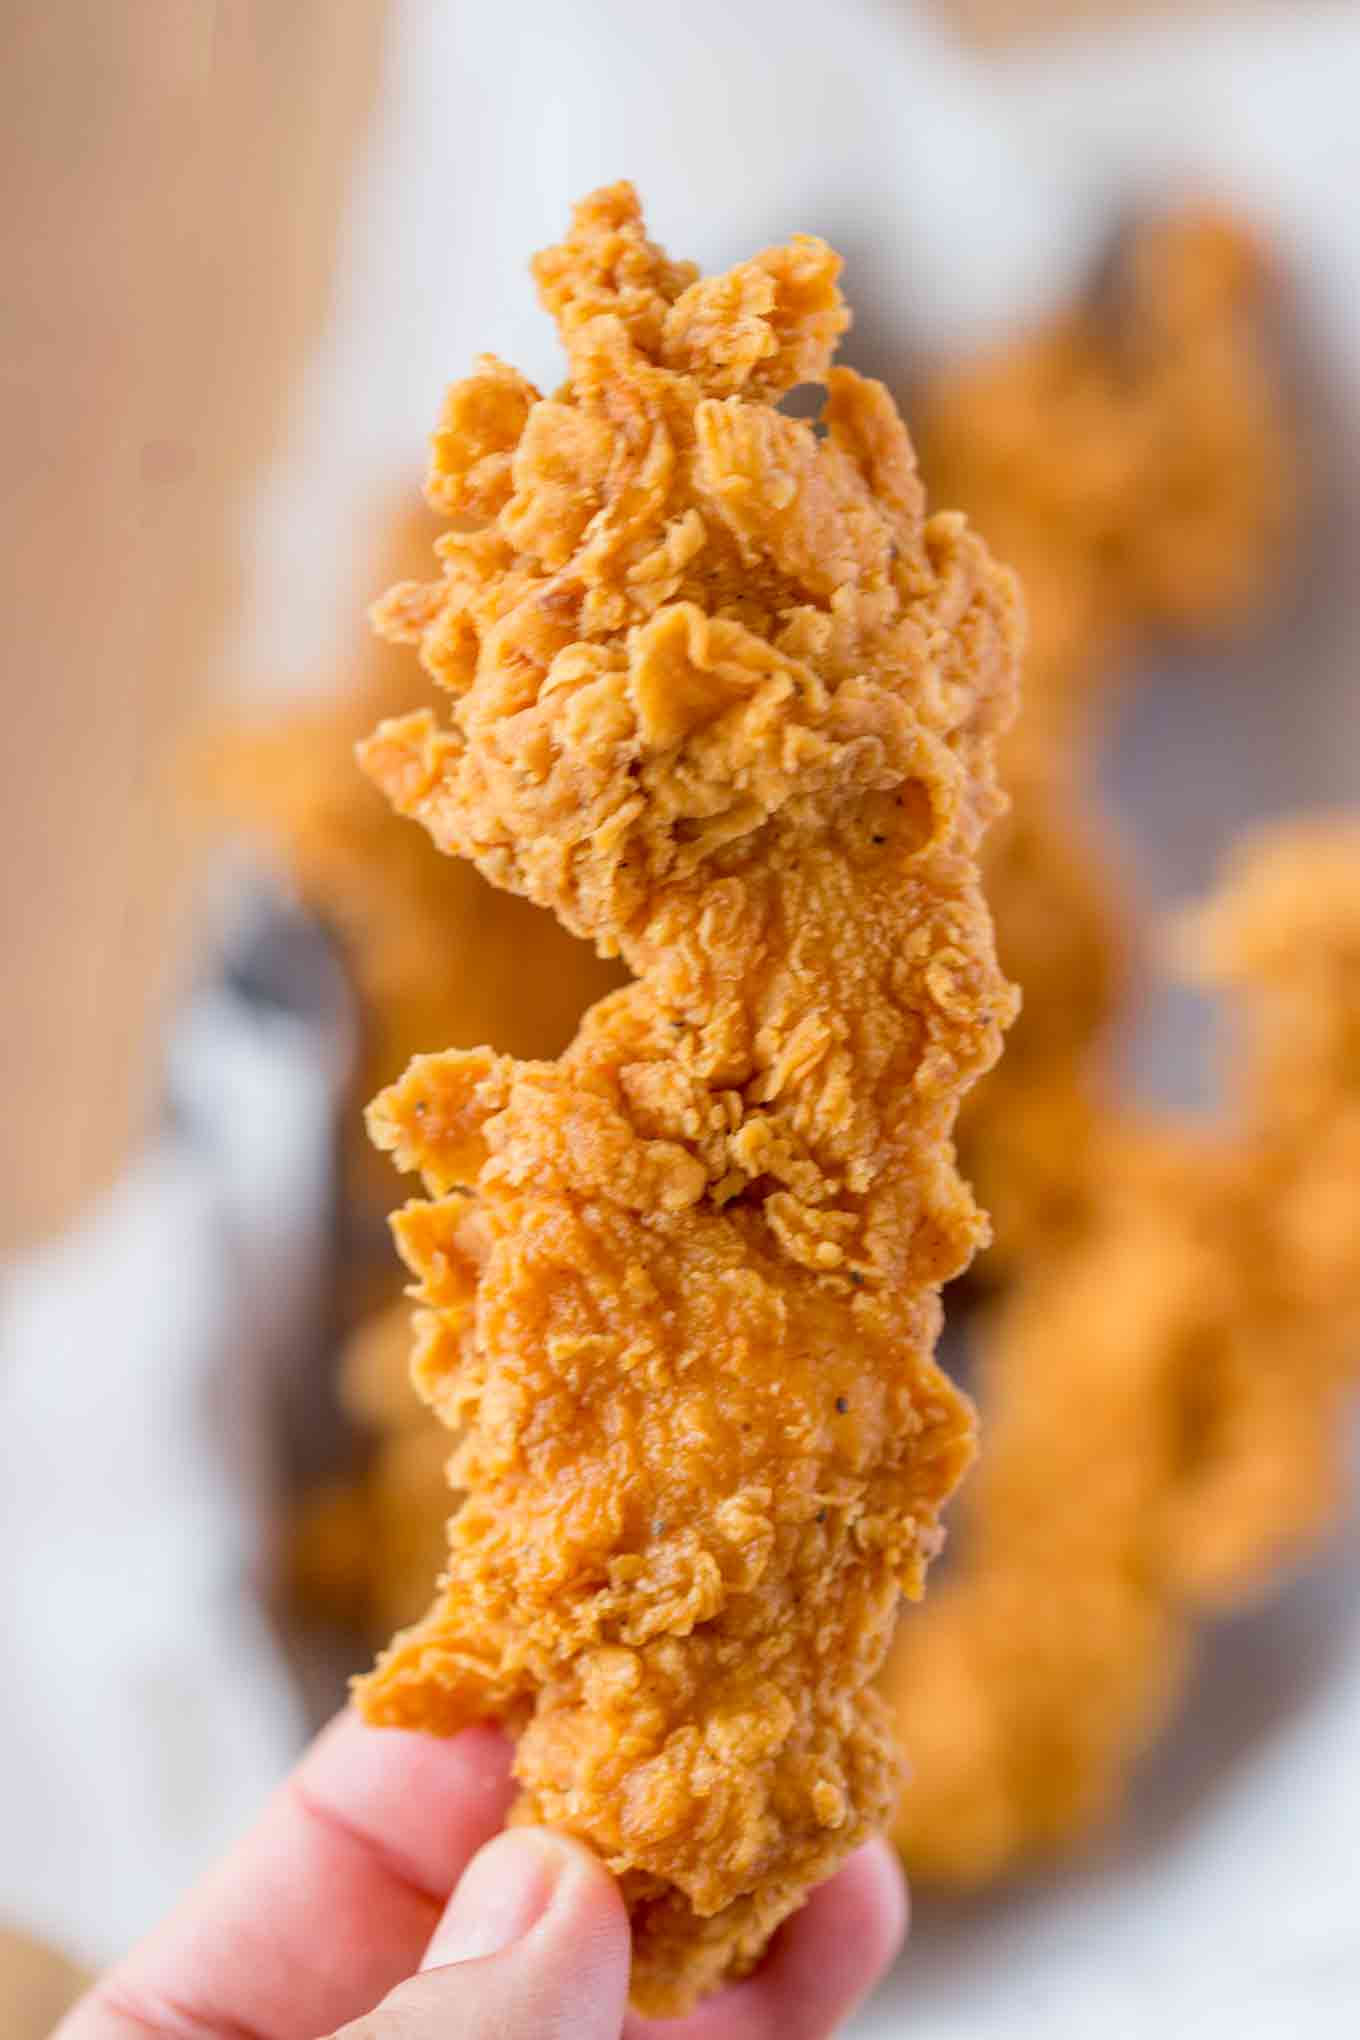 How to Dredge Chicken and Other Foods for a Tasty Crispy Coating